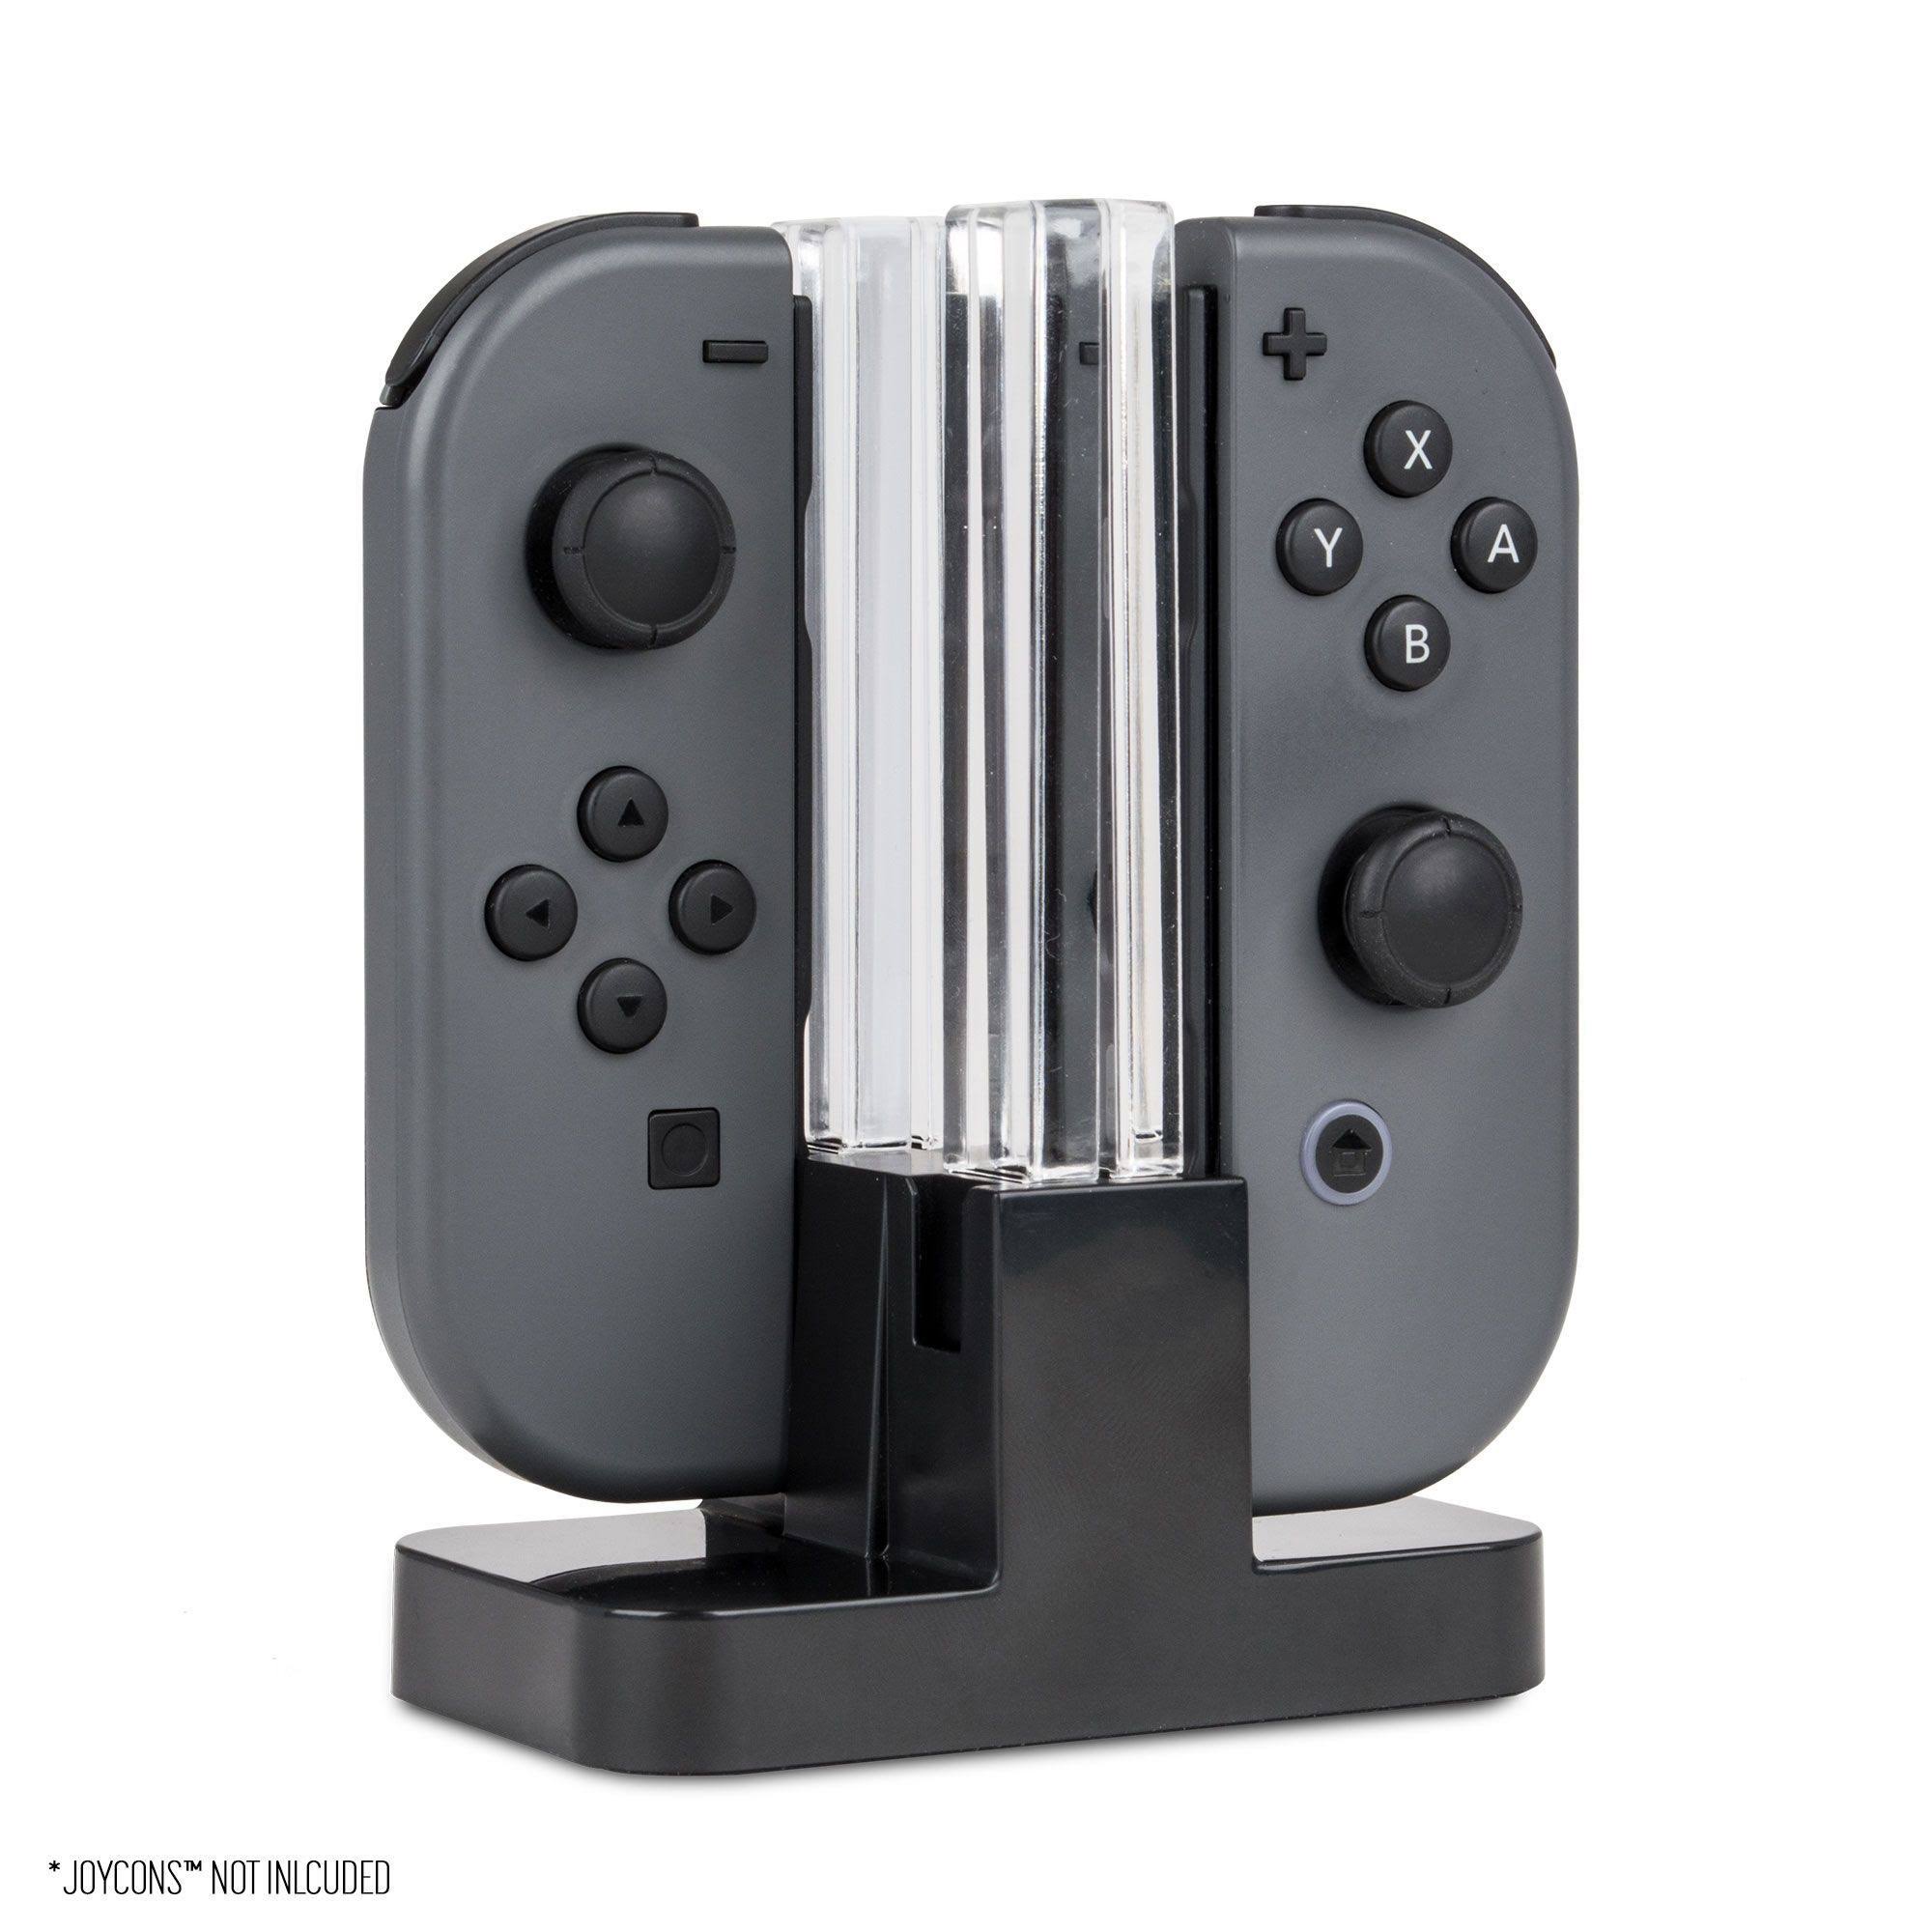 KMD Nintendo Switch Joy-Con Charging Dock Station with Type-C USB Cable Charger